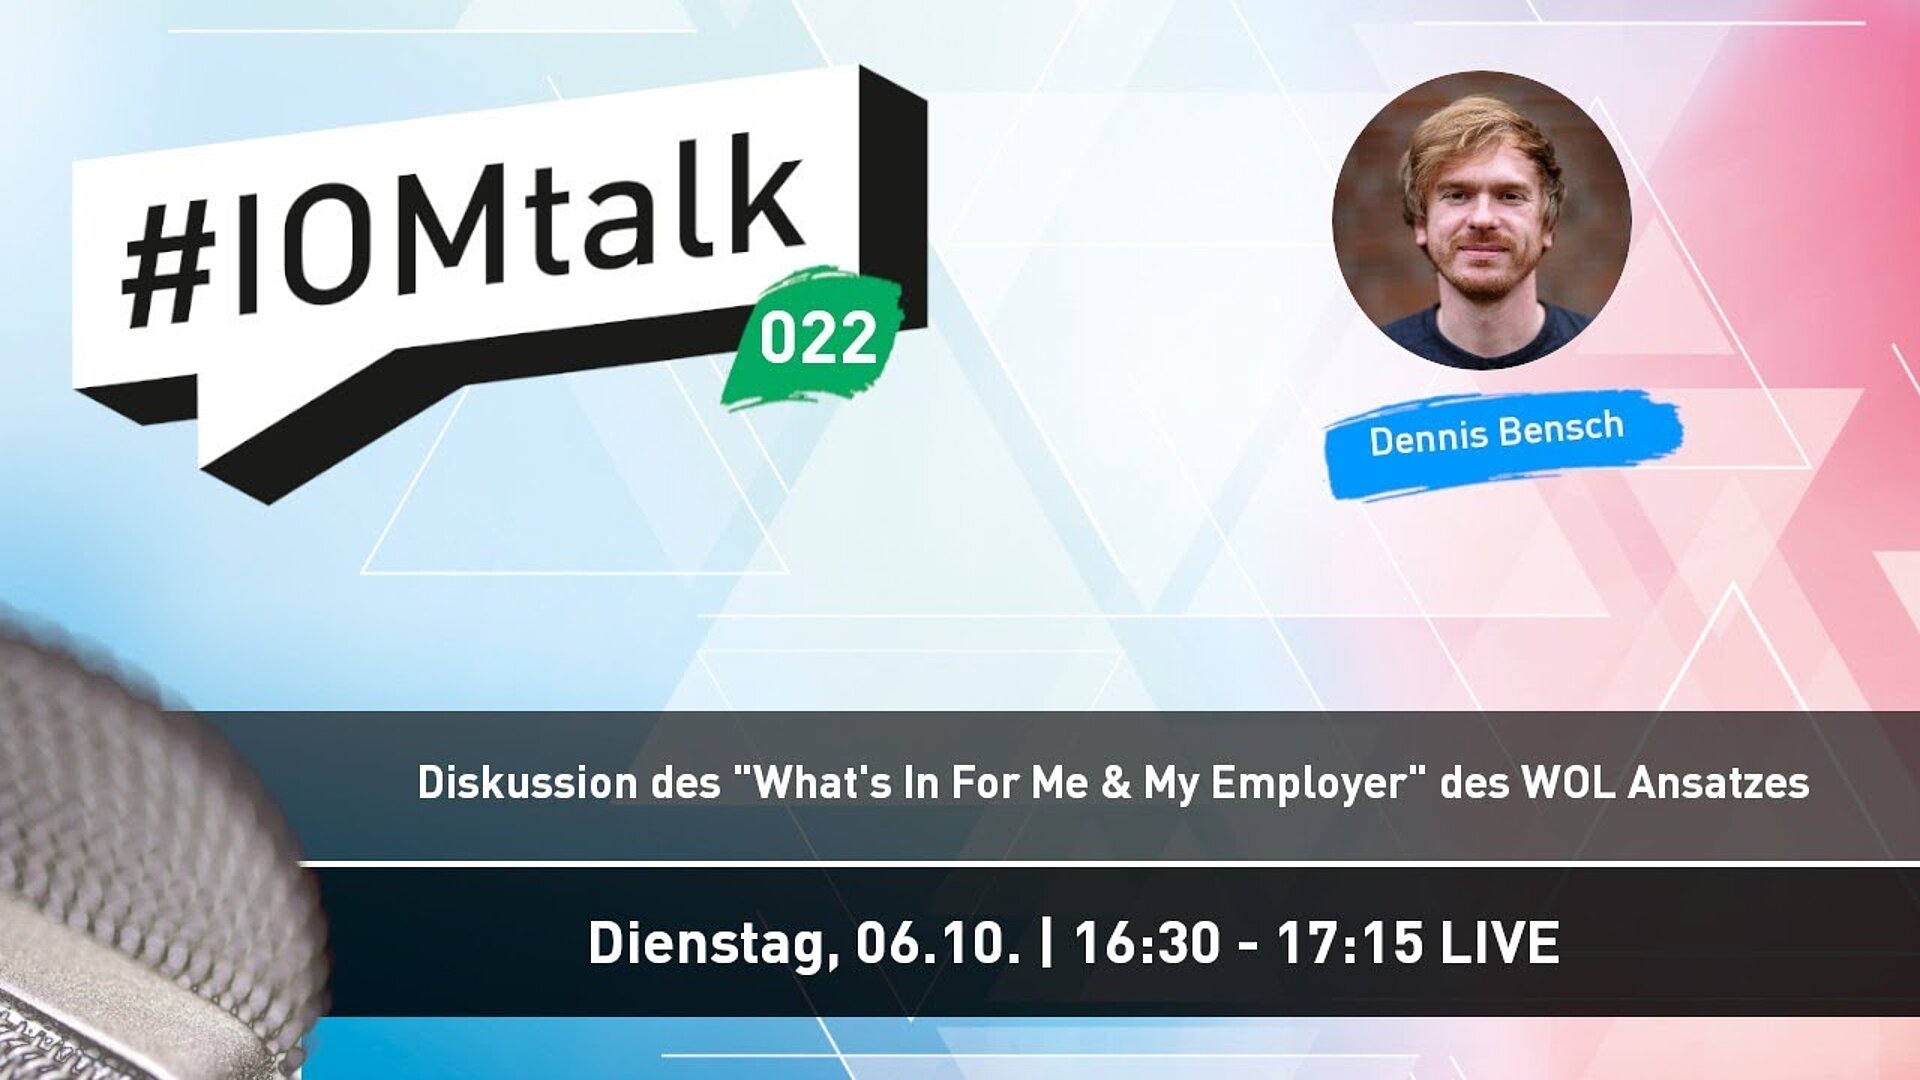 Diskussion des "What Is In For Me & My Employer" des WOL Ansatzes